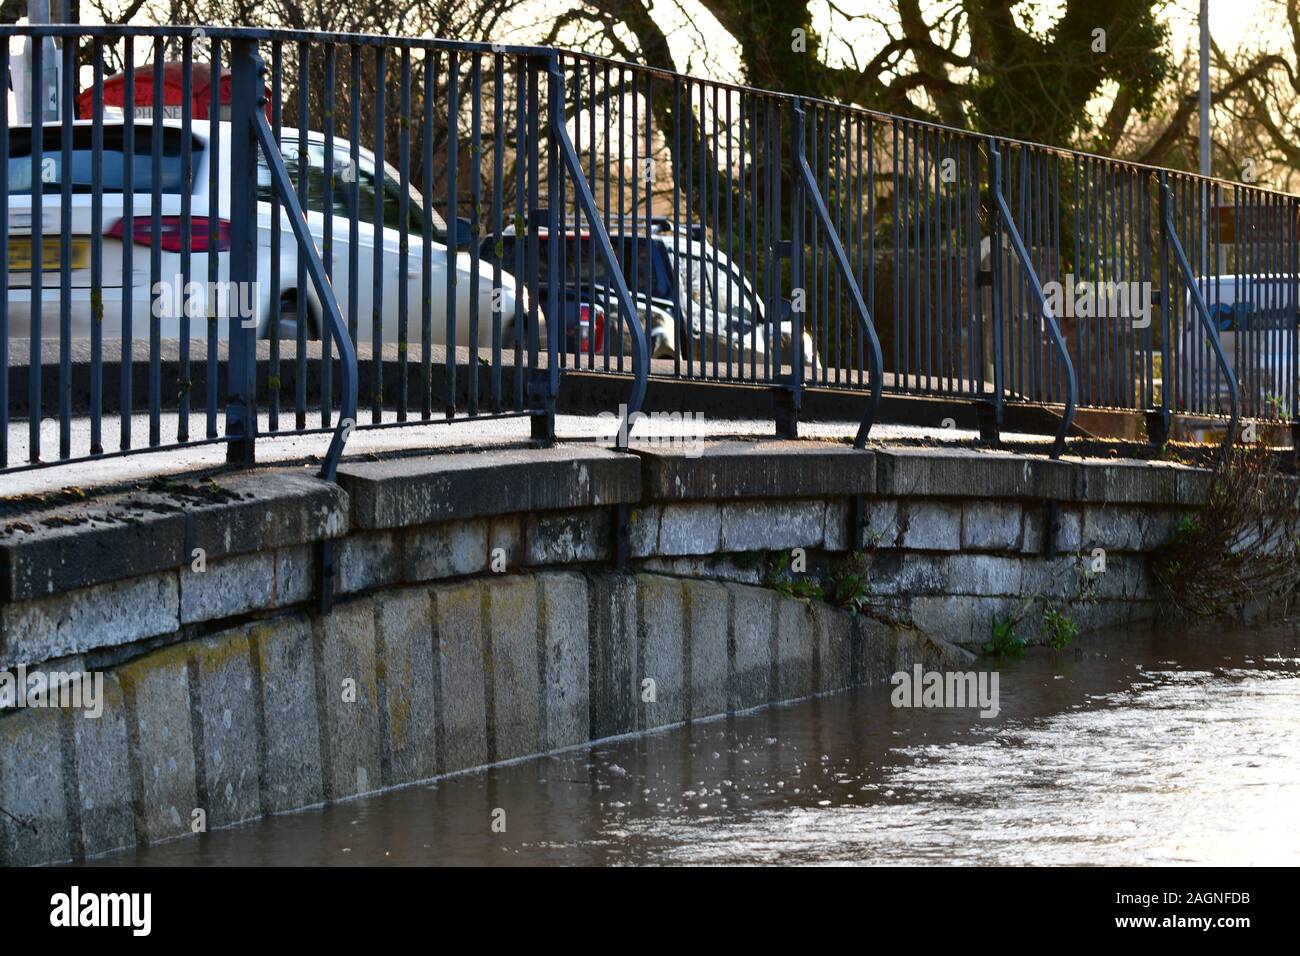 Burrowbridge, Somerset. 20th Dec 2019. UK Weather. Burrowbridge in Somerset seen with water levels very high during heavy flooding in surrounding areas. Picture Credit Robert Timoney/Alamy/Live/News Stock Photo